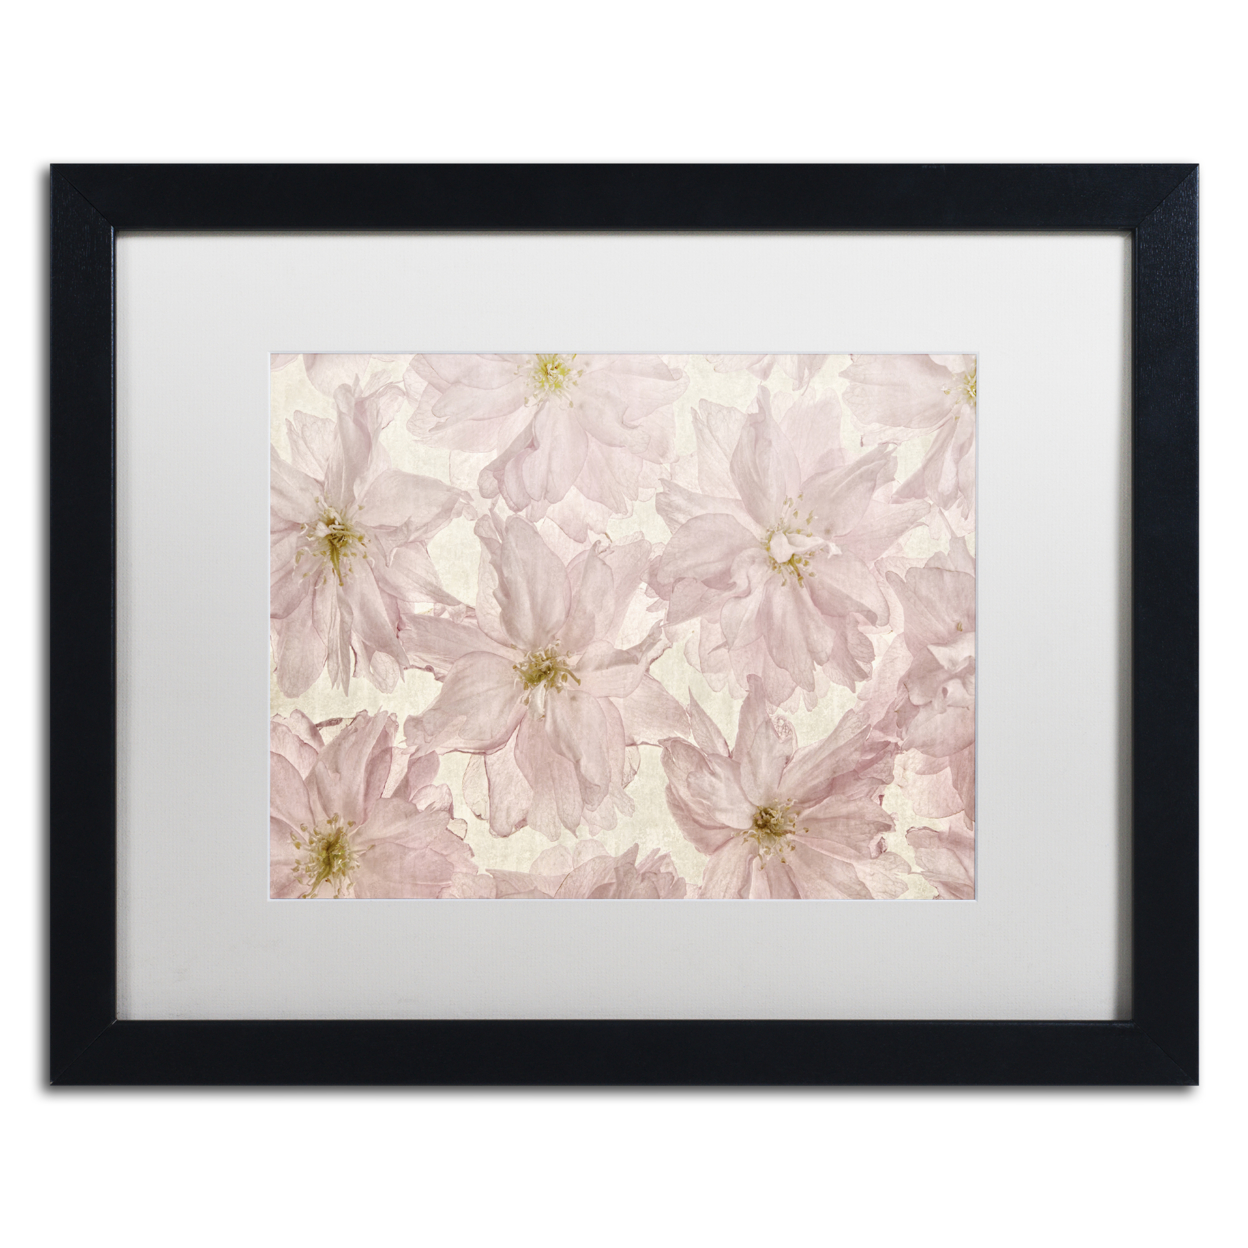 Cora Niele 'Vintage Blossom' Black Wooden Framed Art 18 X 22 Inches